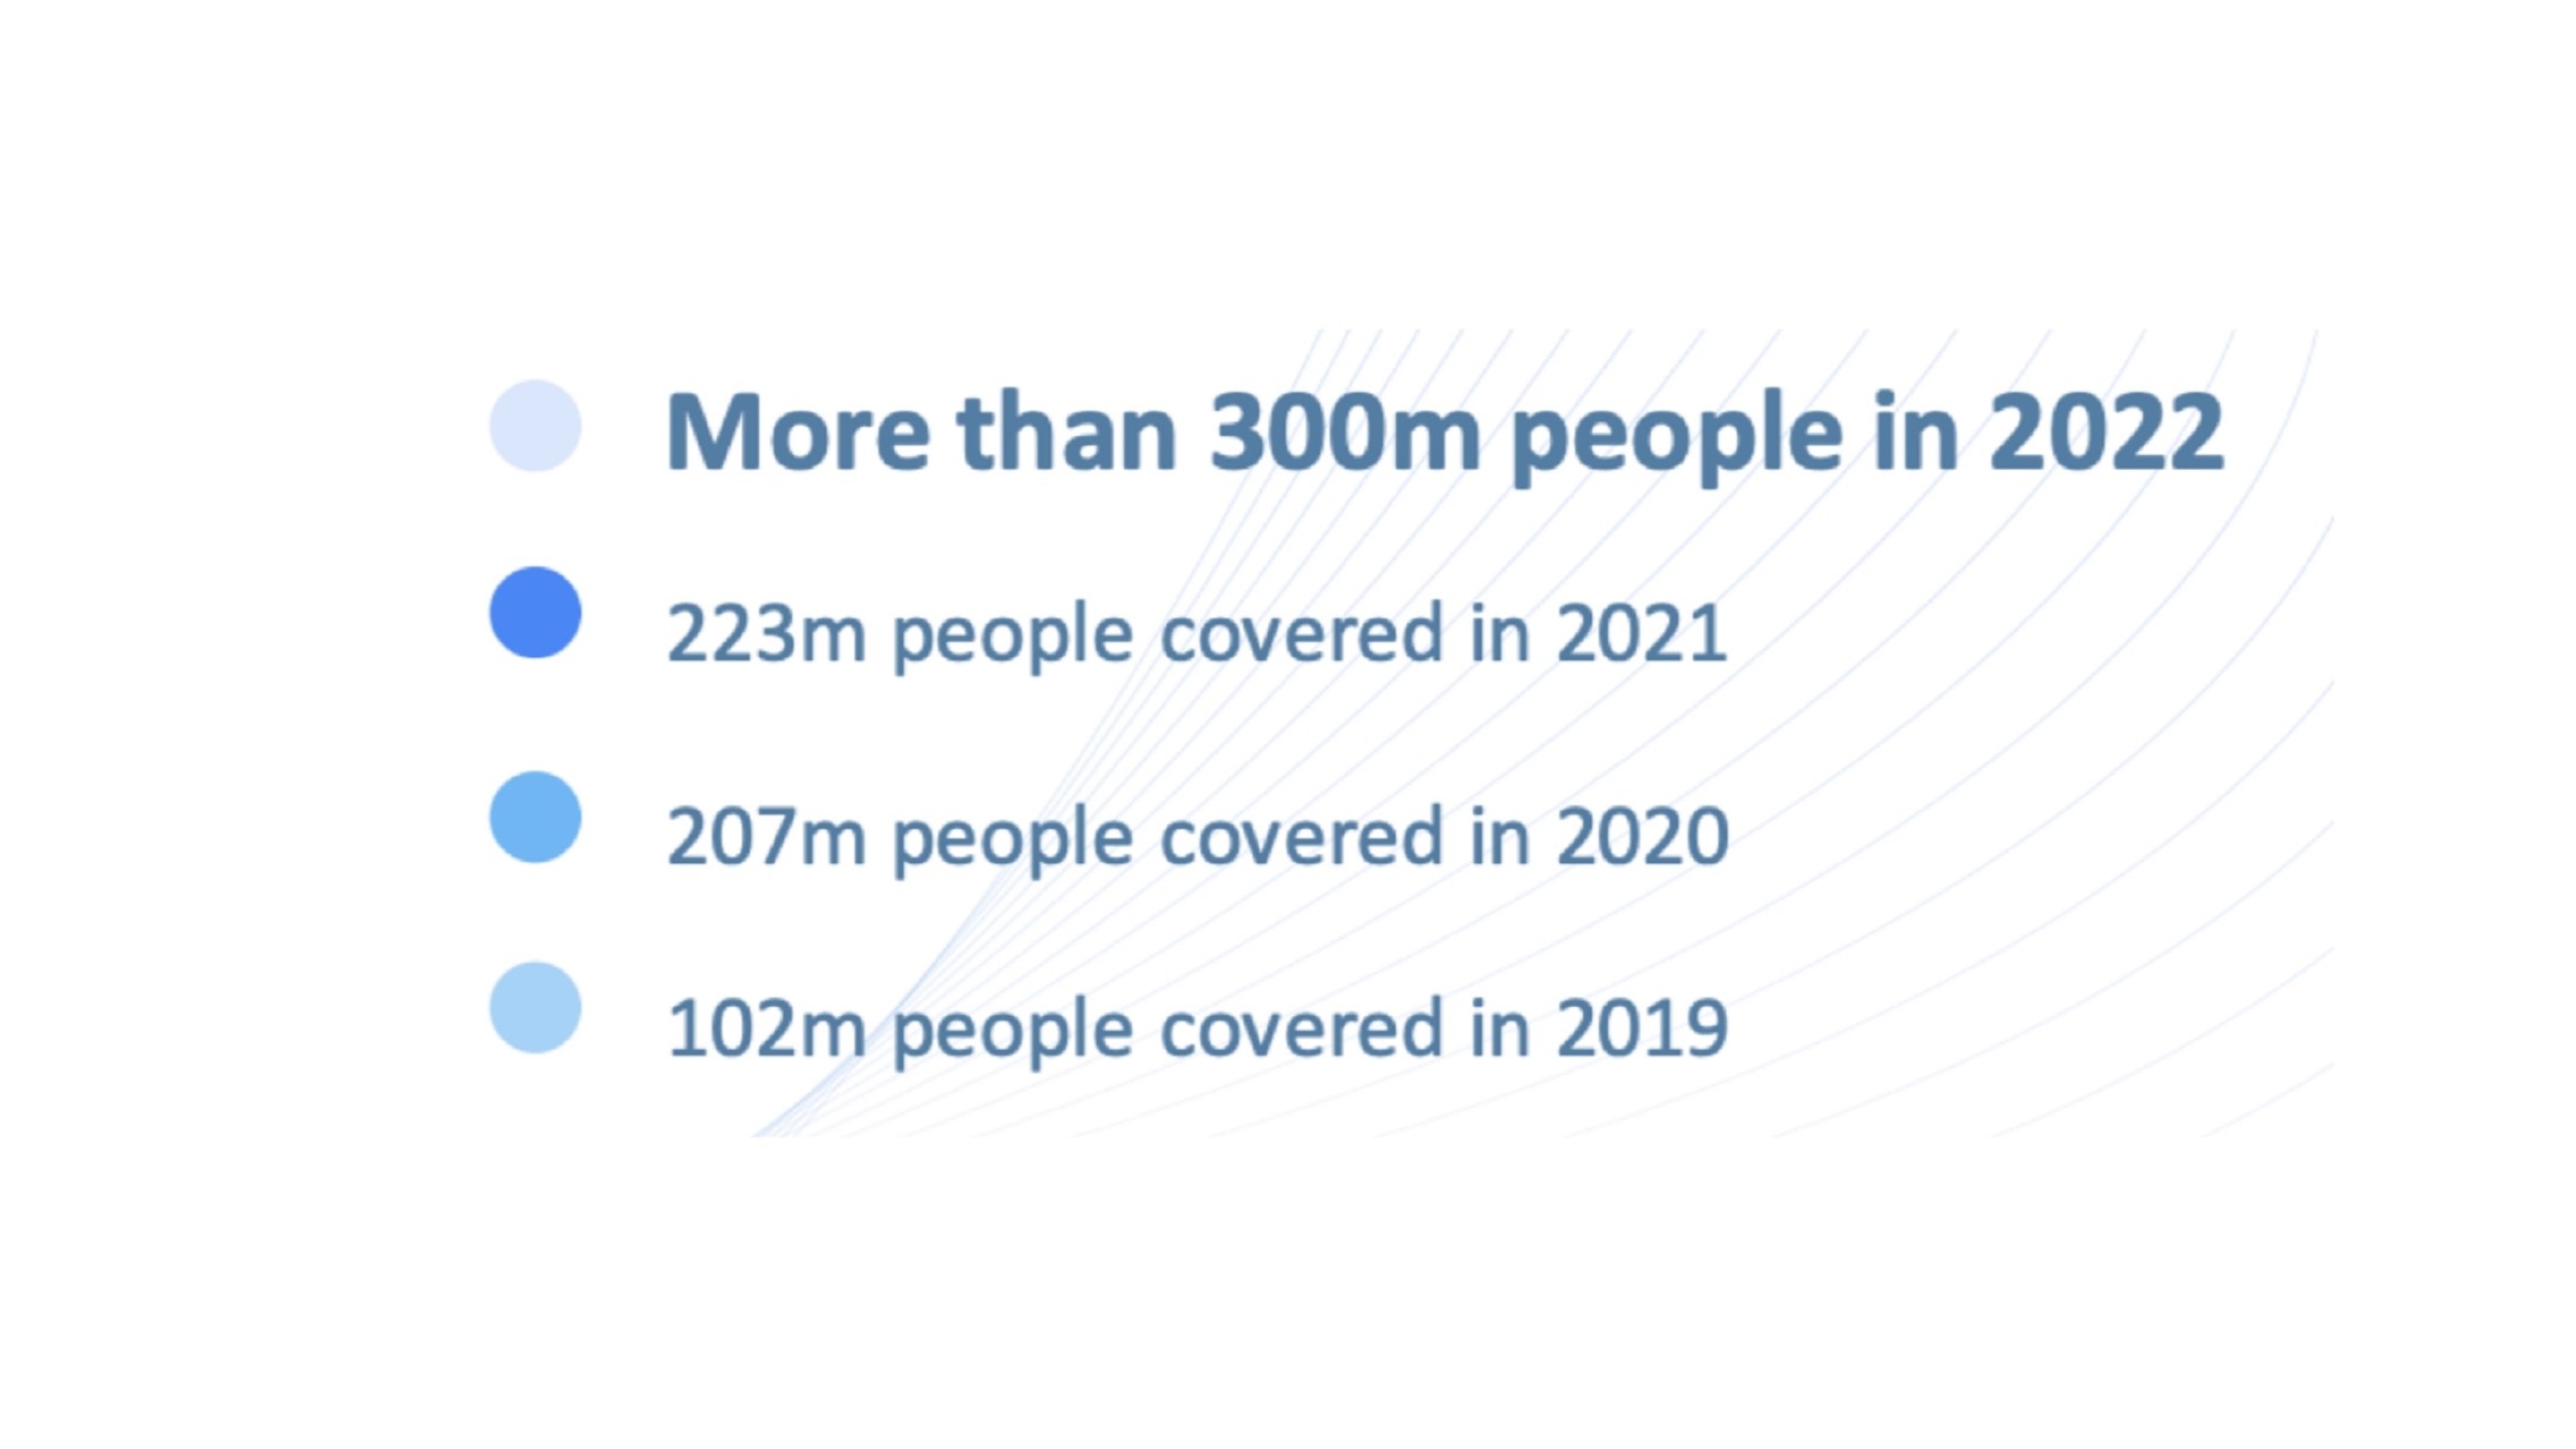 Figure 1, Summary of Microinsurance product coverage, 2019 - 2022